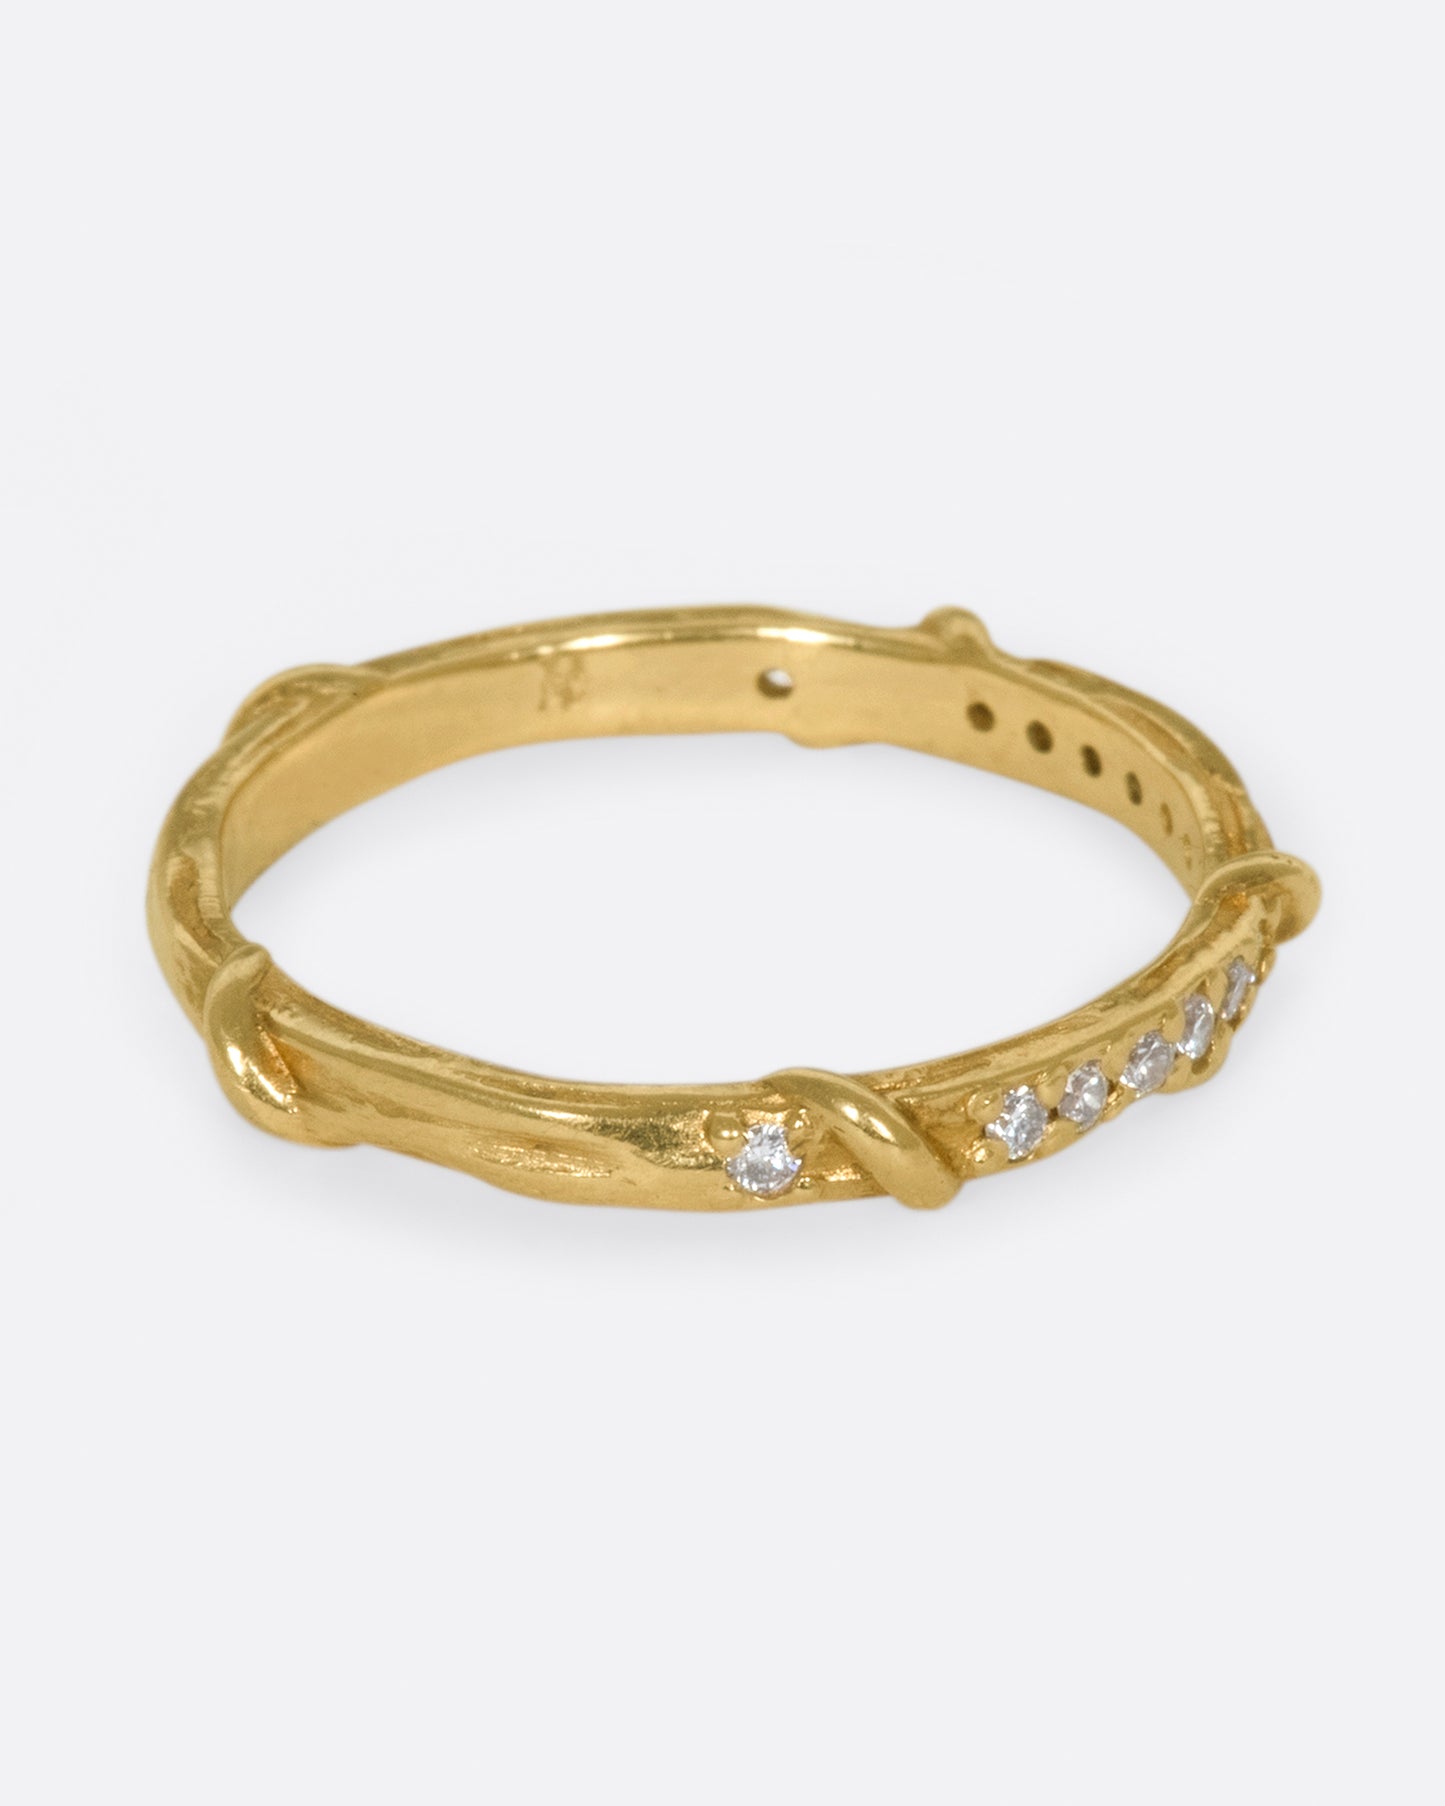 Studded halfway around with diamonds, this band is a twist on a classic with an organic edge.